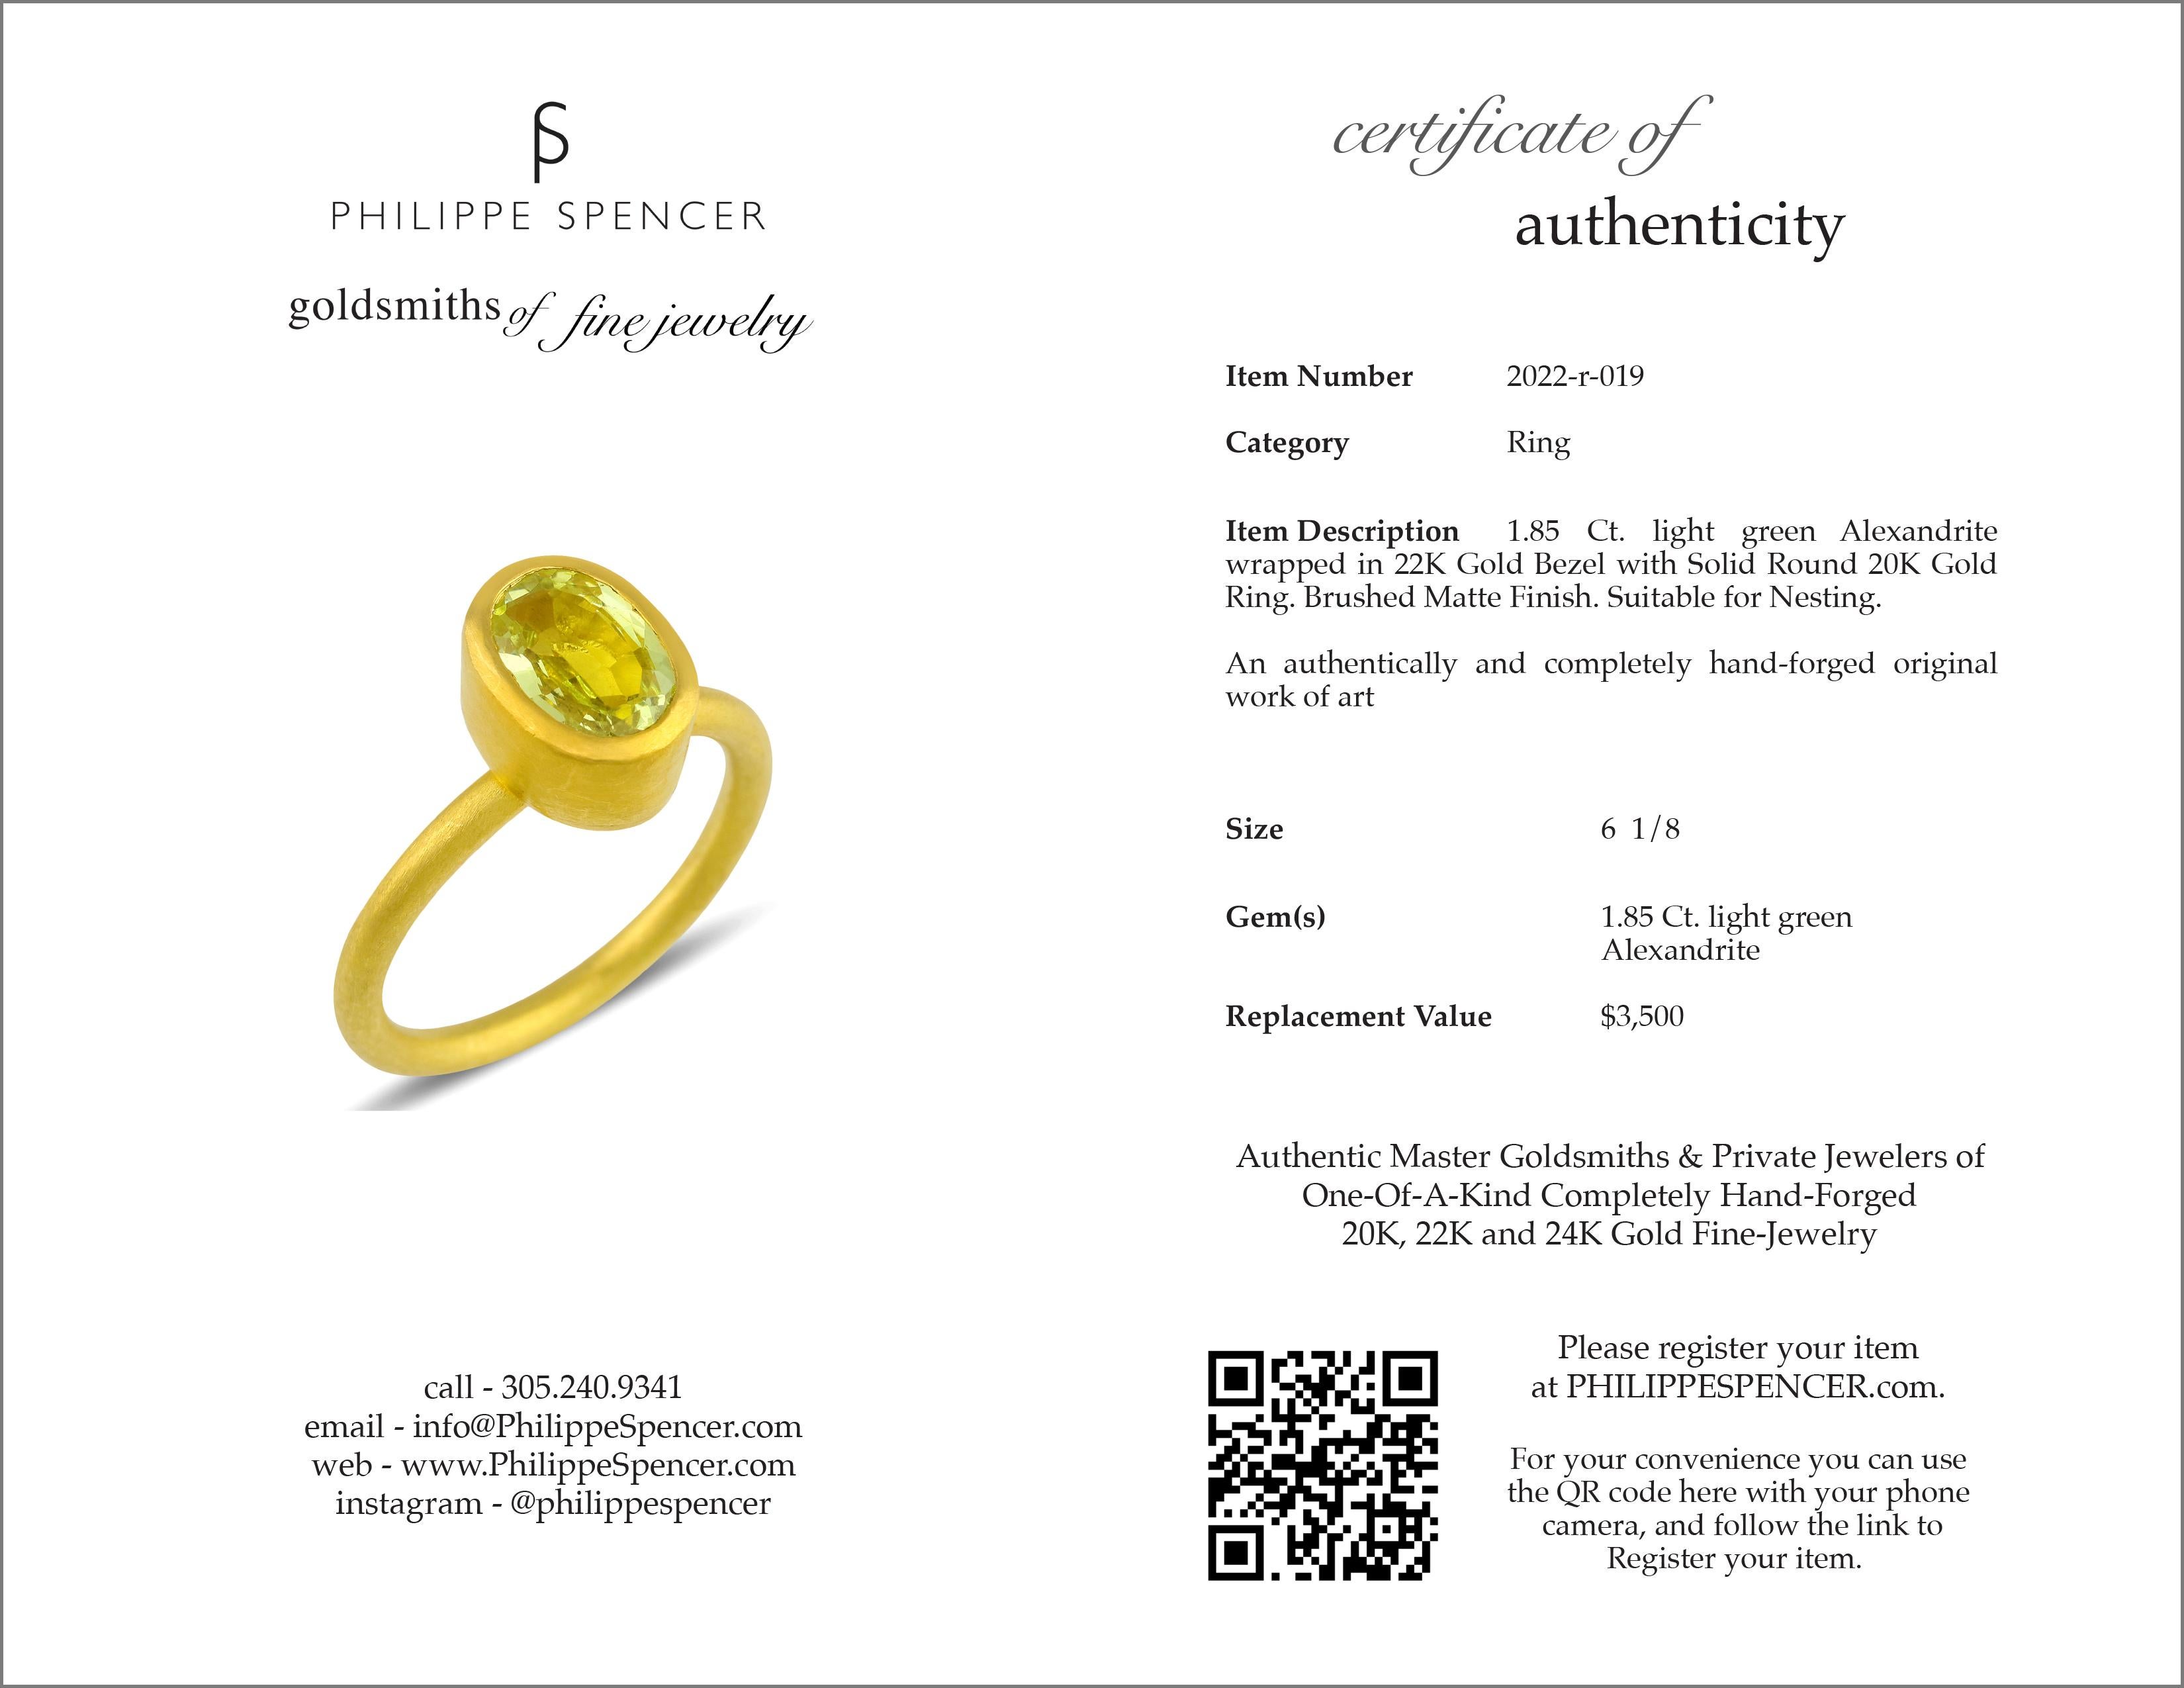 Artisan PHILIPPE SPENCER 1.85 Ct. Alexandrite in 22K and 20K Gold Solitaire Ring